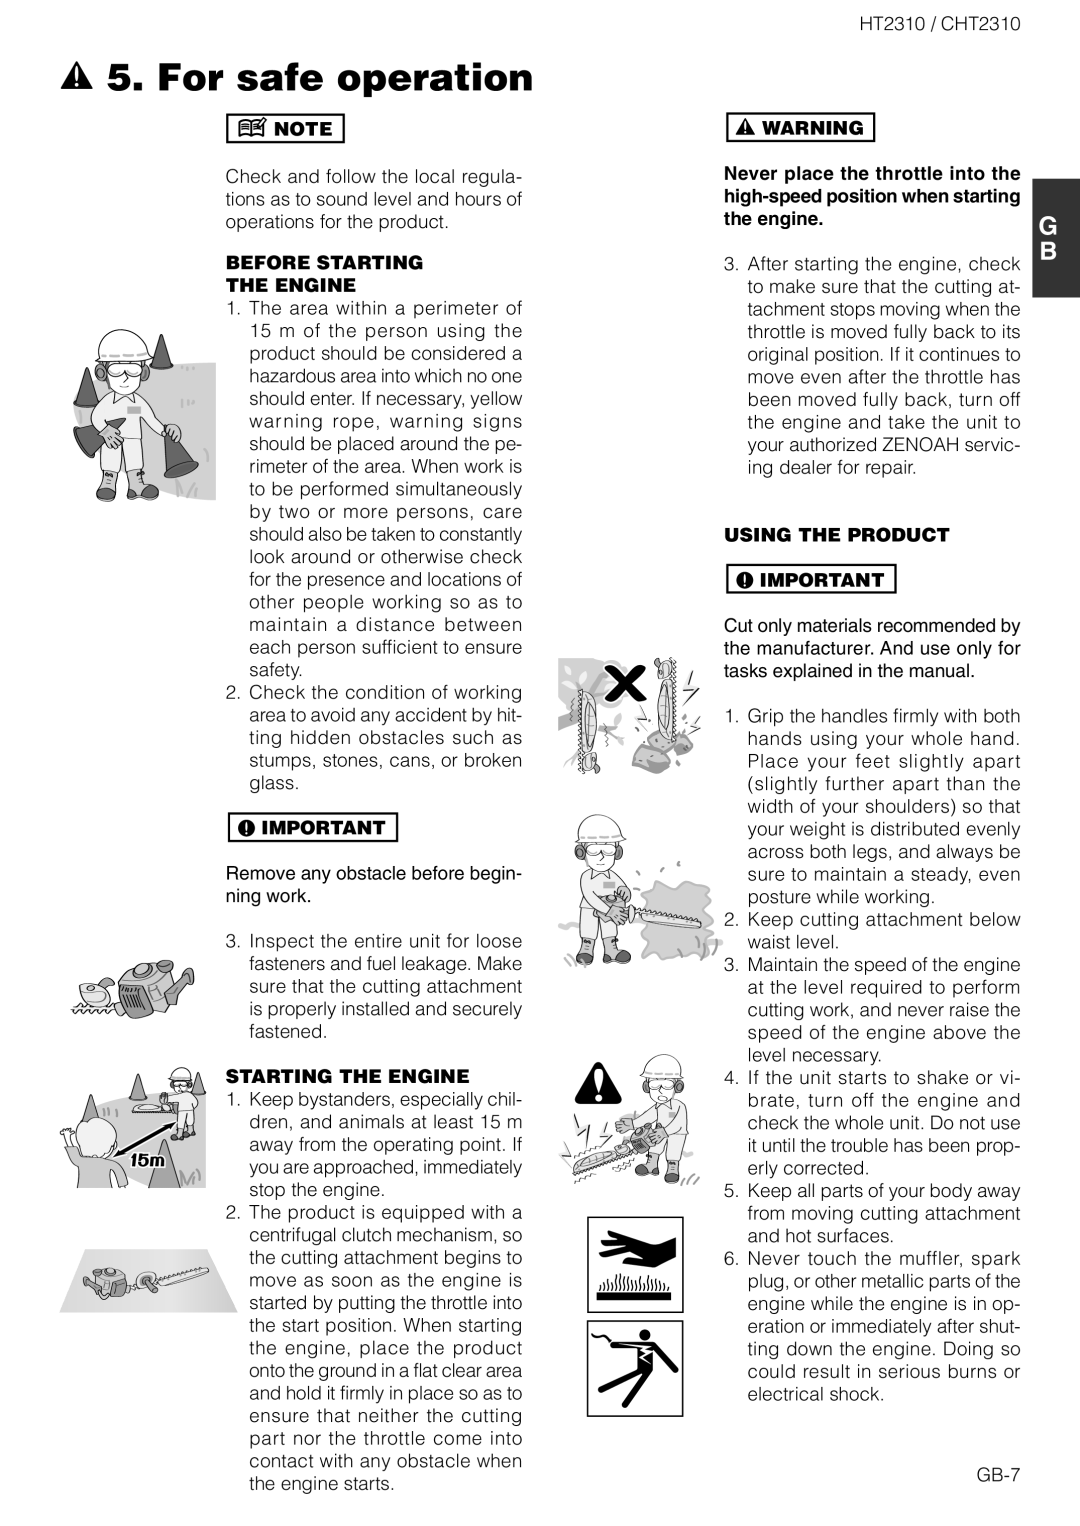 Zenoah CHT2310 owner manual Before Starting The Engine, Never place the throttle into the, the engine, Using The Product 